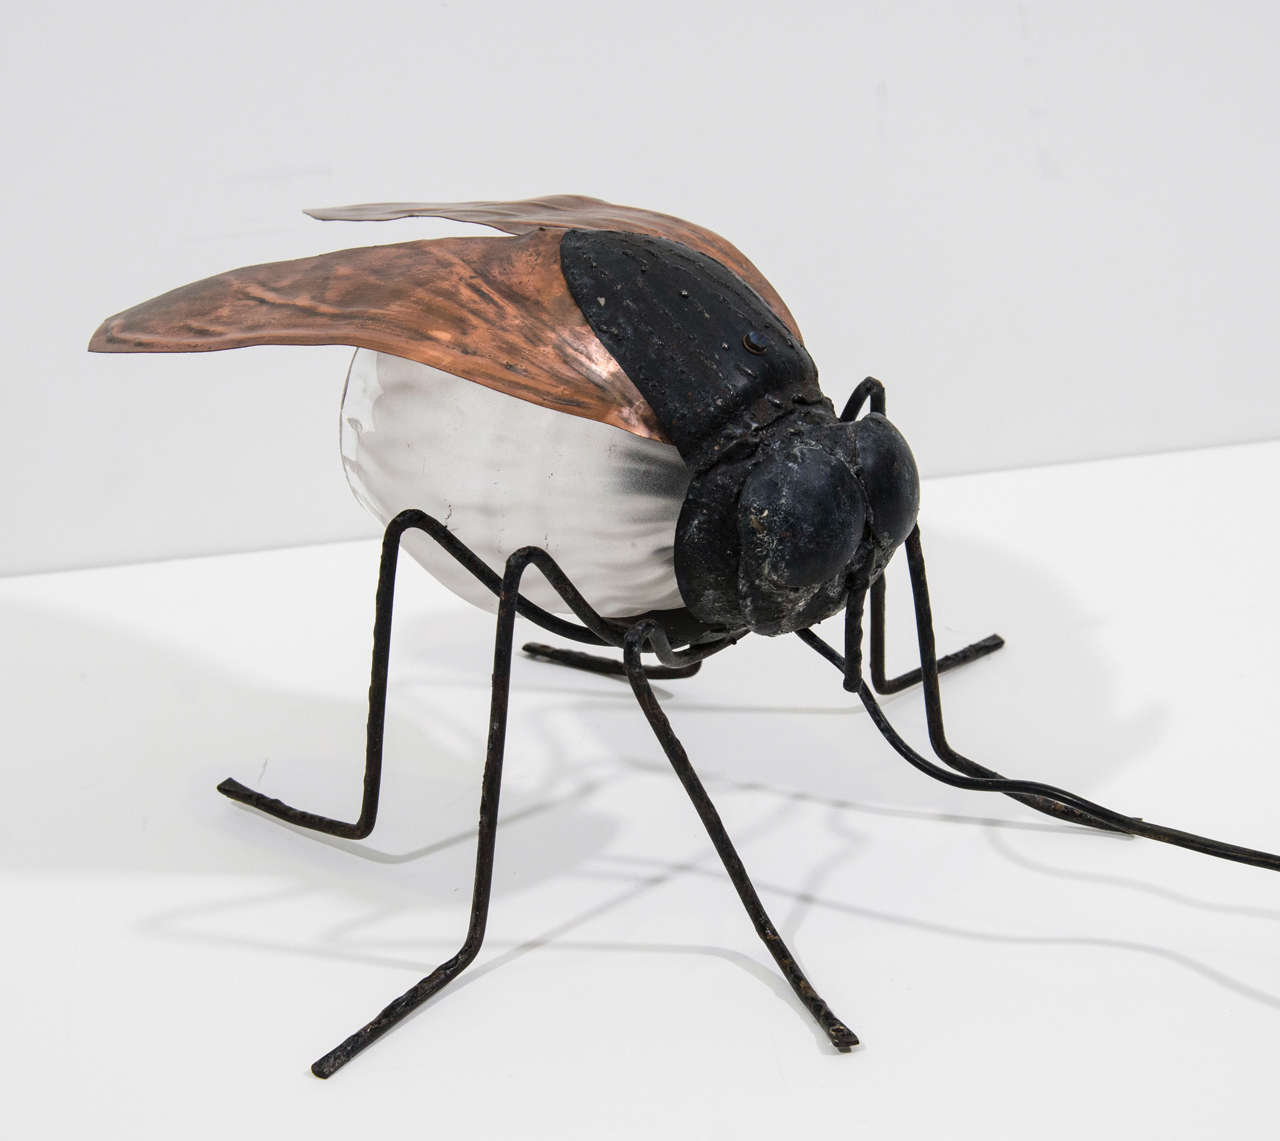 This little bugger can be used as a table lamp or mounted on a wall. This is one fantastic fly that you won't want to swat!